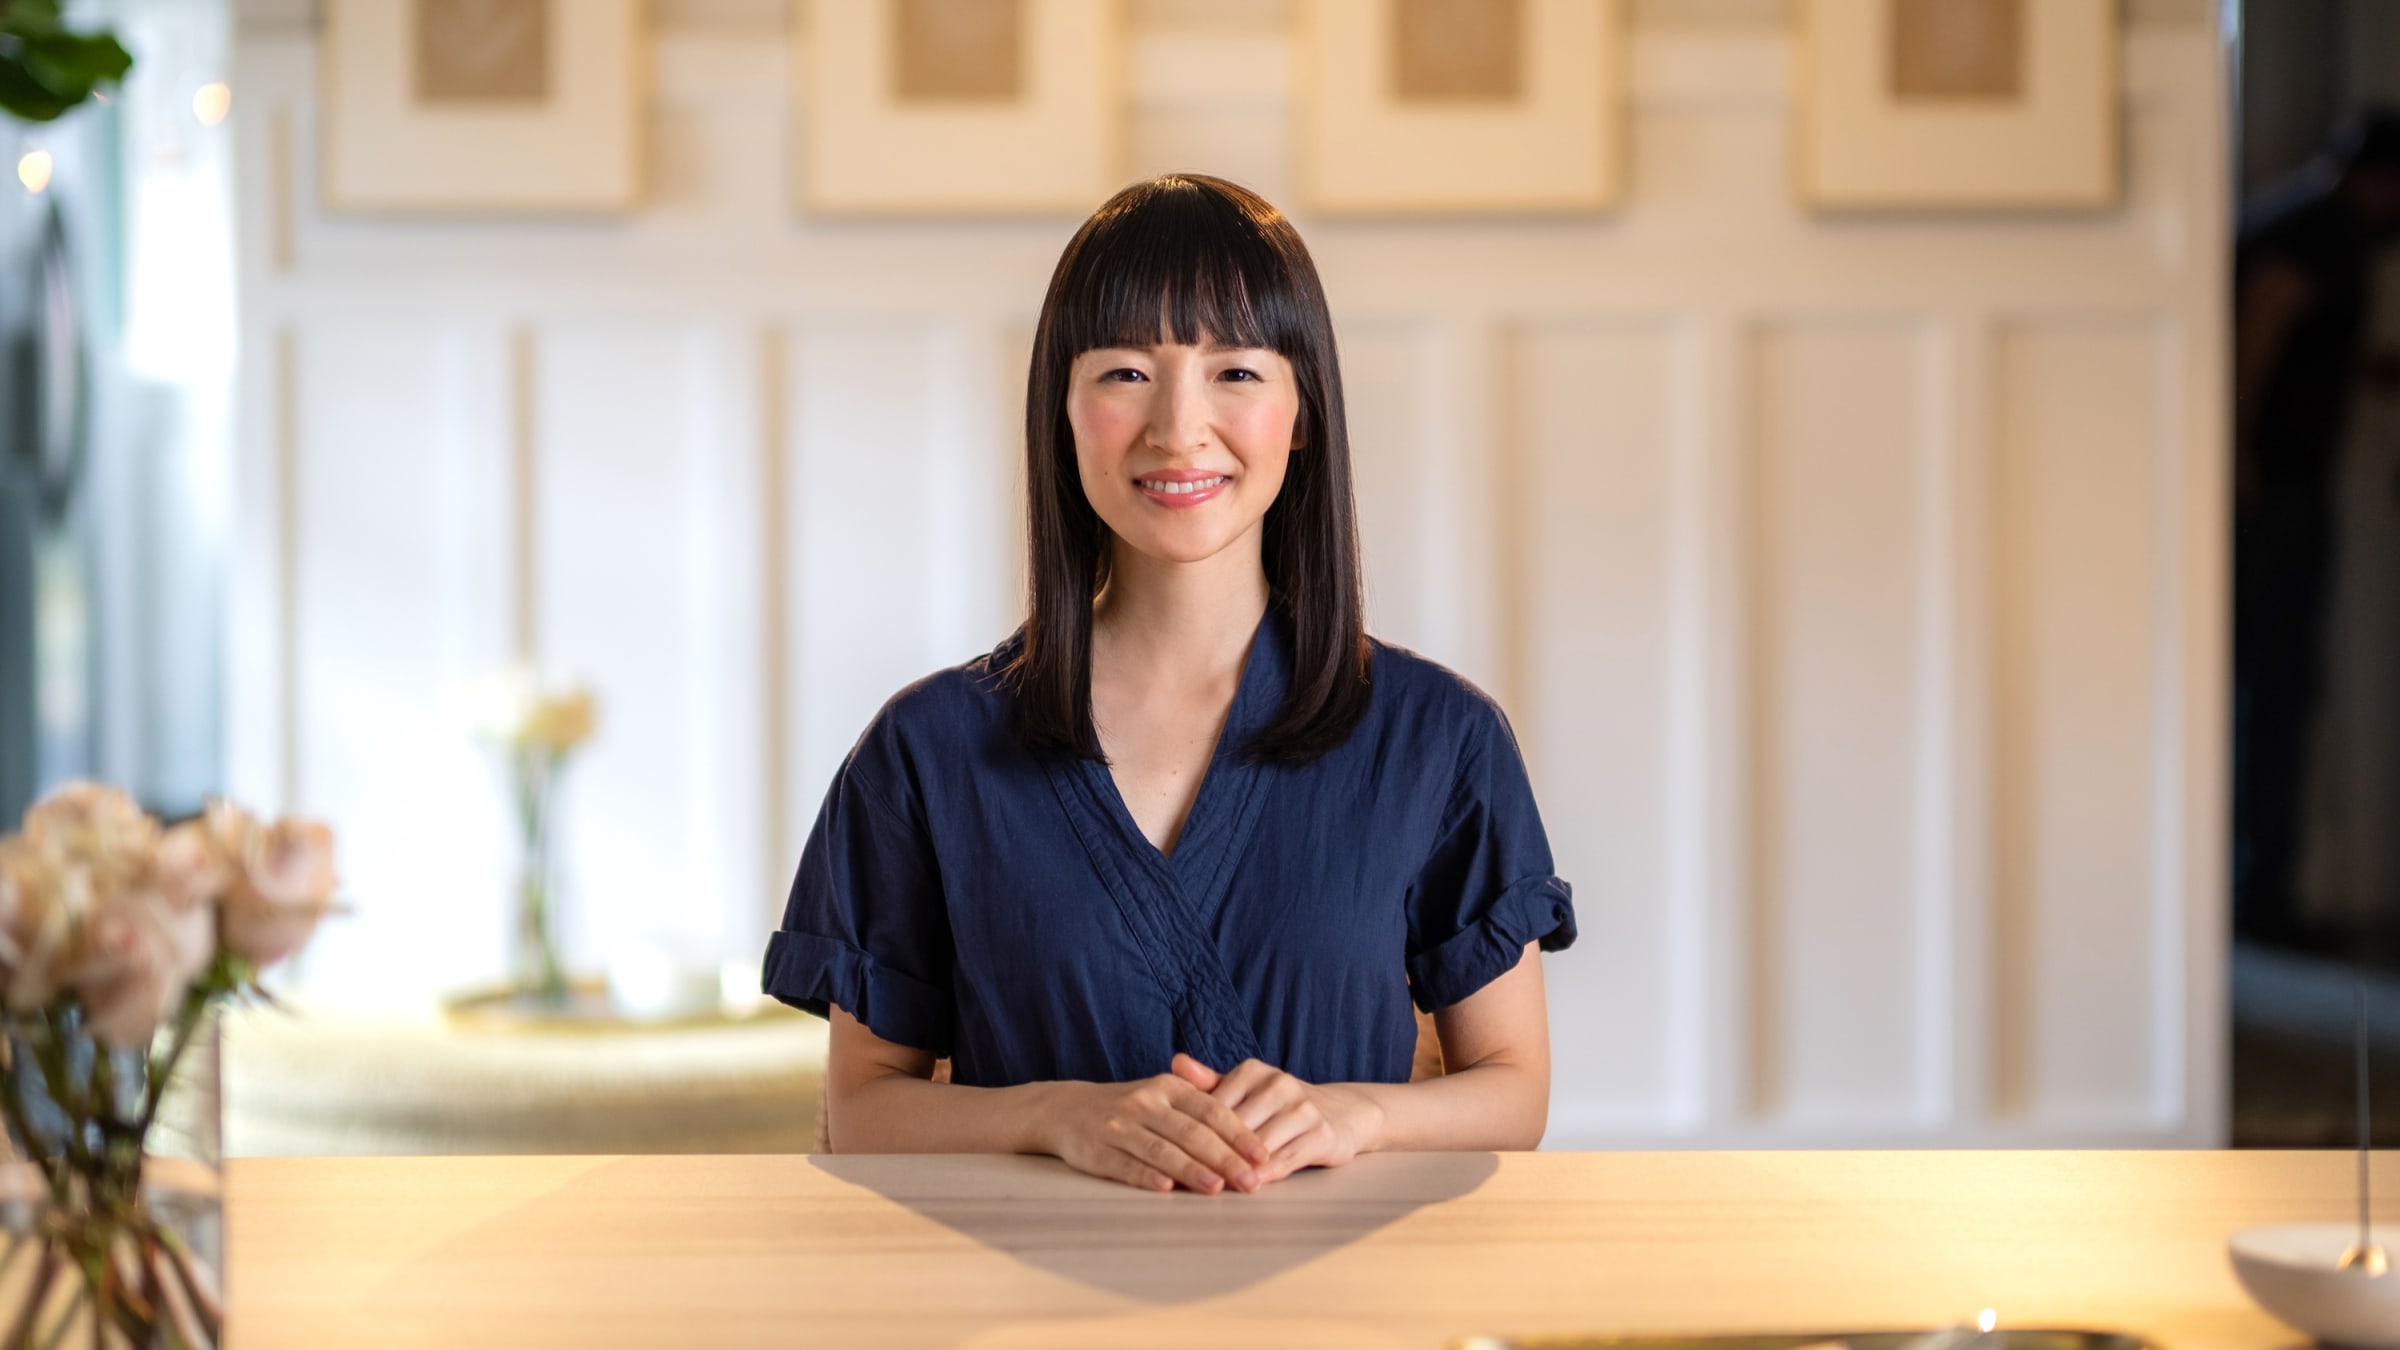 Marie Kondo on 'Sparking Joy' in the Time of COVID and the Alison Roman Mess